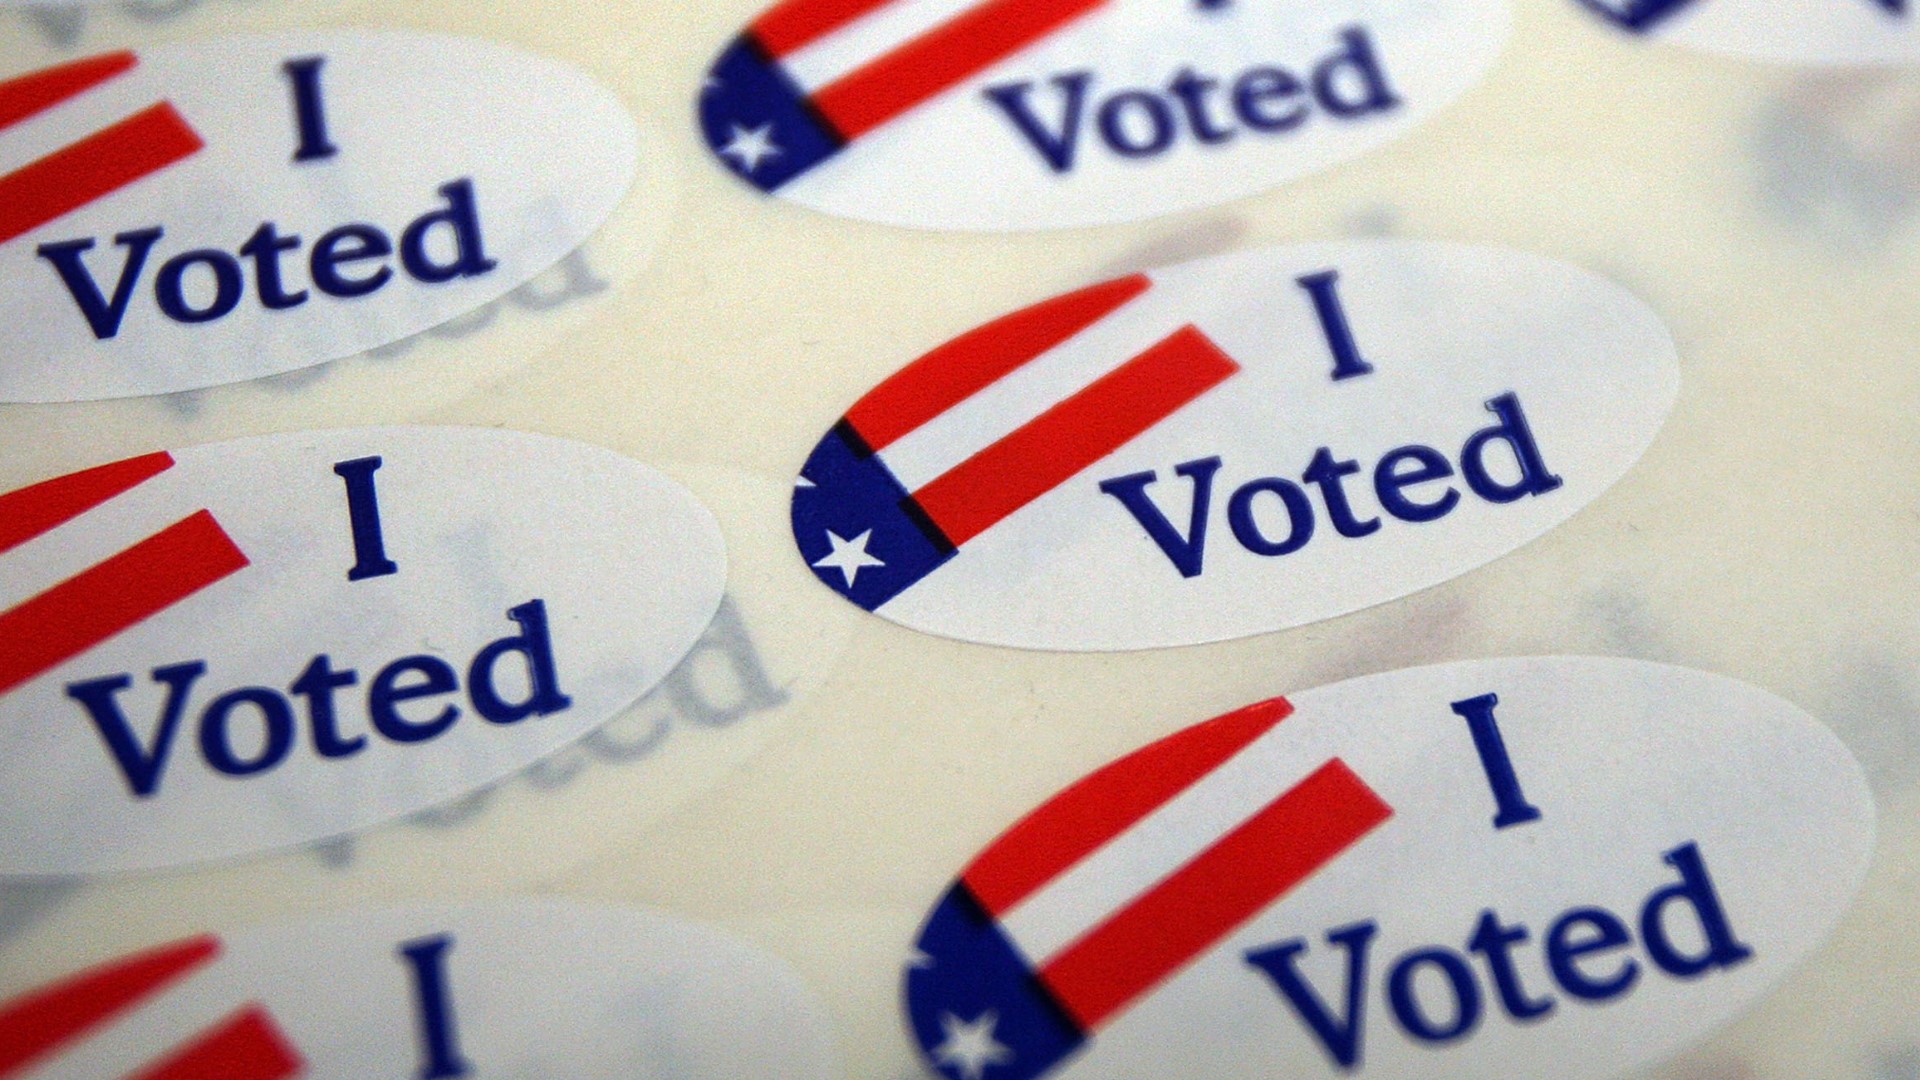 Virginia can prepare to cast their ballot whether that be through early voting, on Election Day, or by absentee.